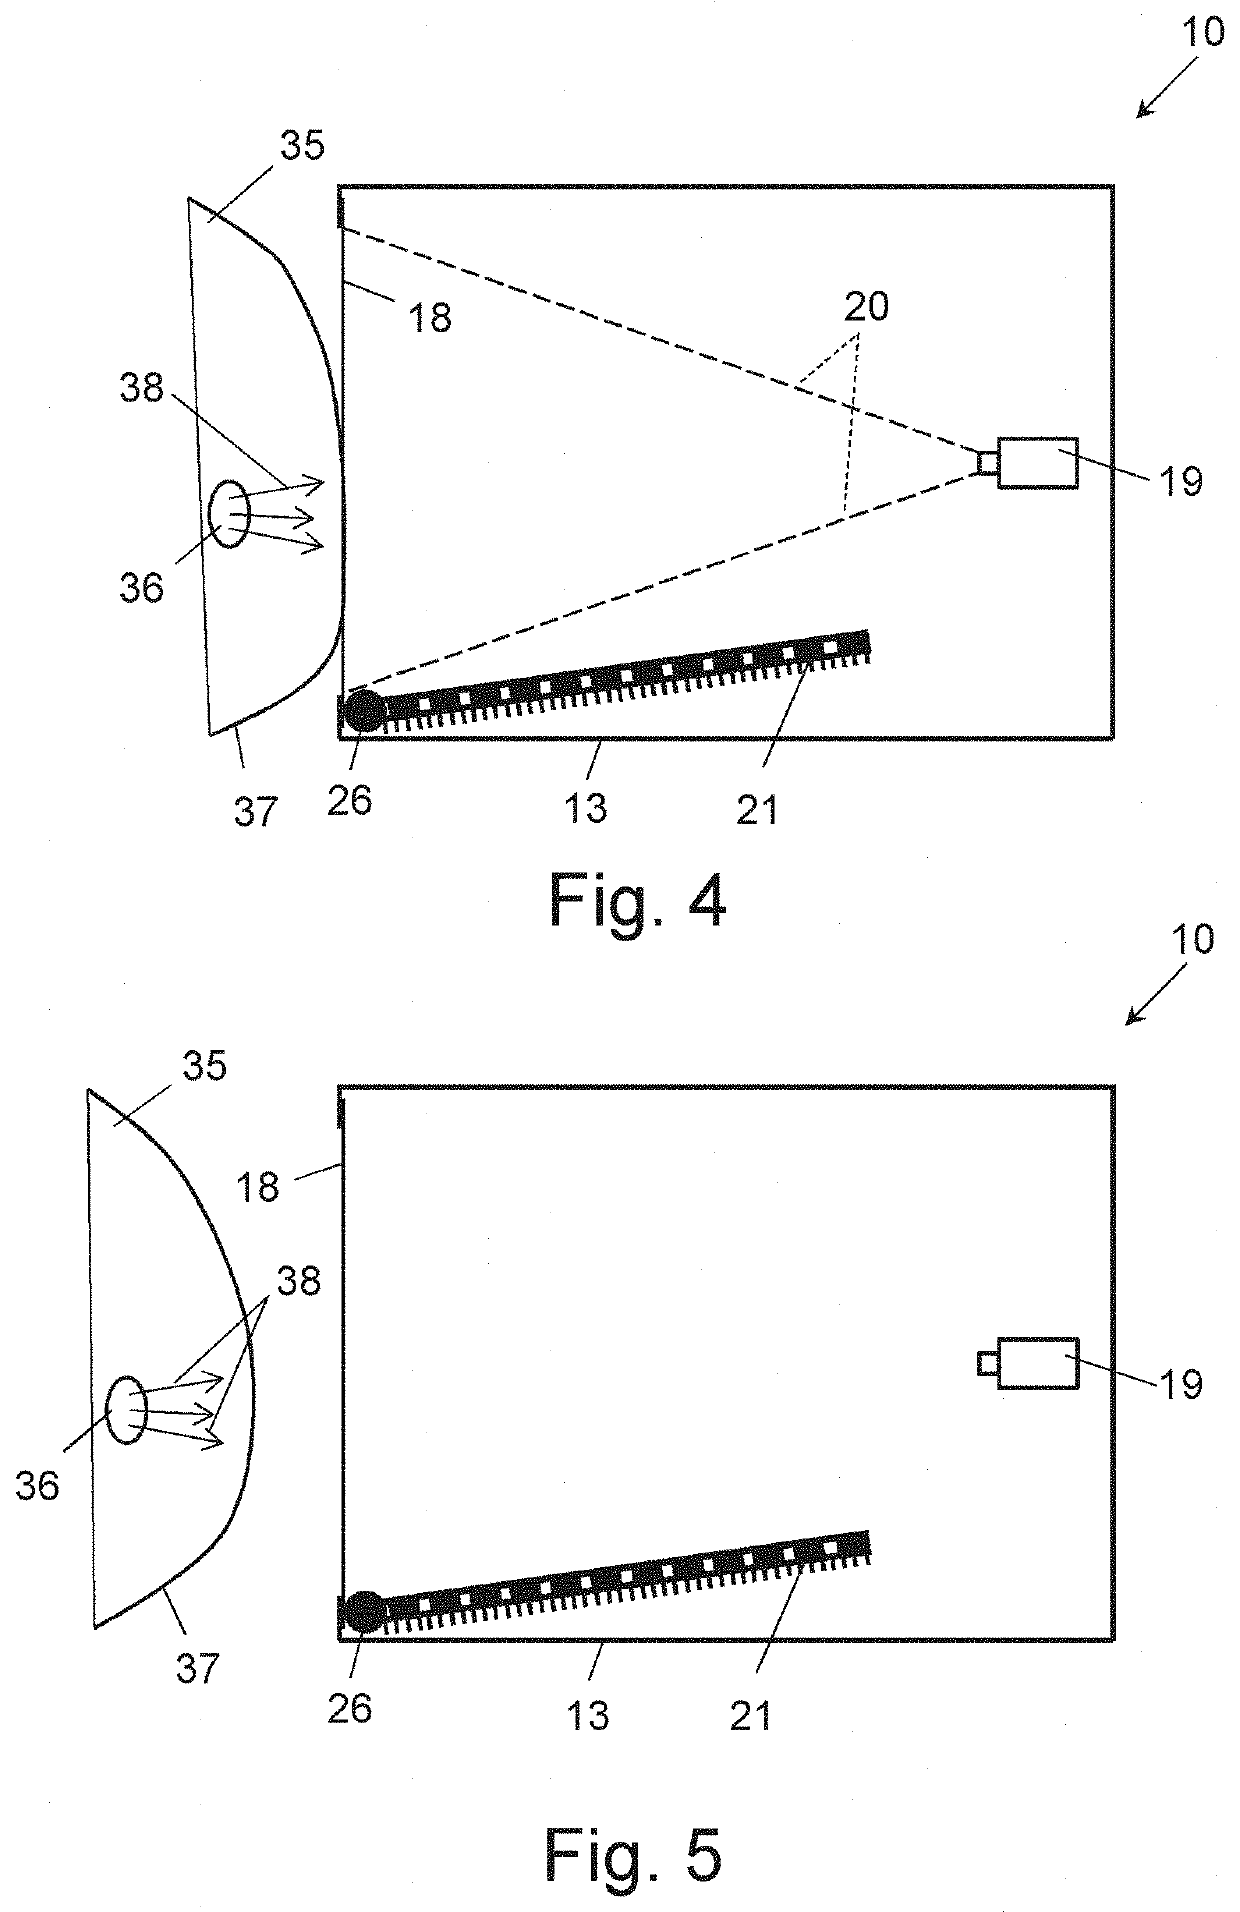 A device and method for thermal imaging of a living mammal body section